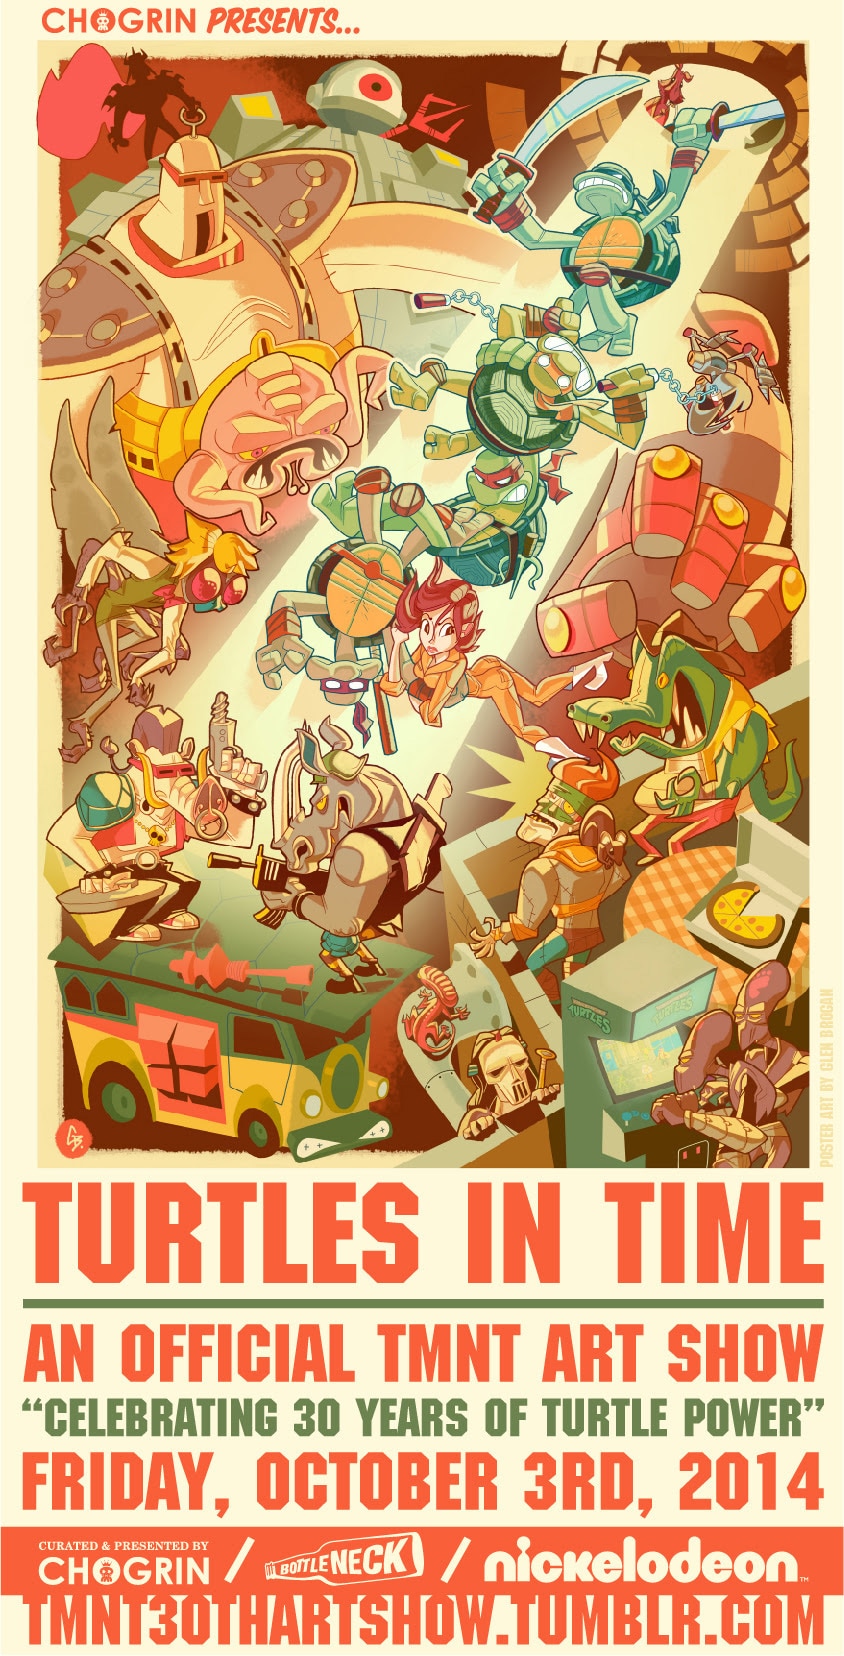 Official TMNT "Turtles in Time" Art Show 